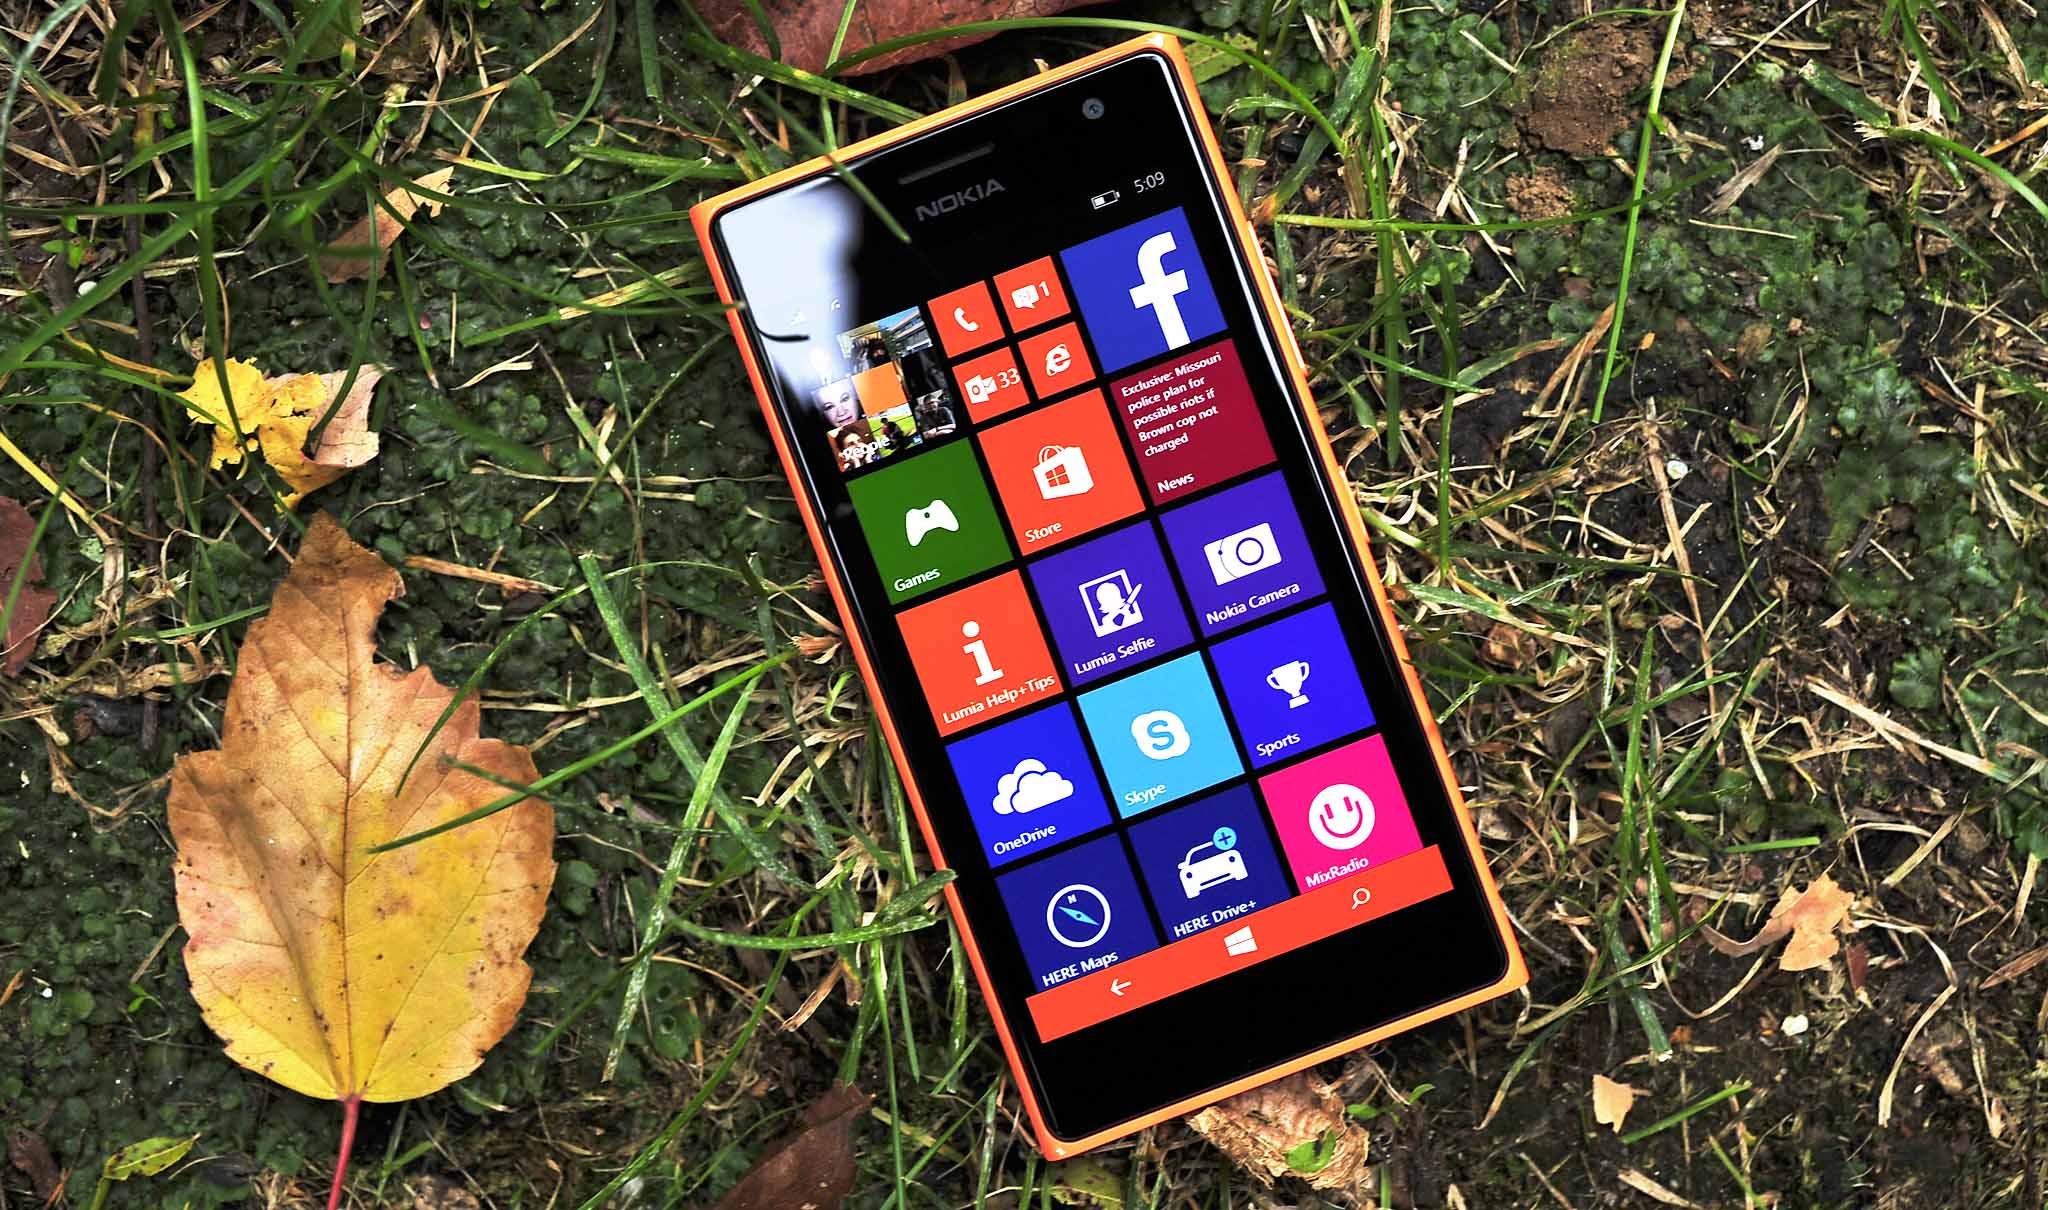 Nokia Lumia 735 - Unboxing and first impressions of the 